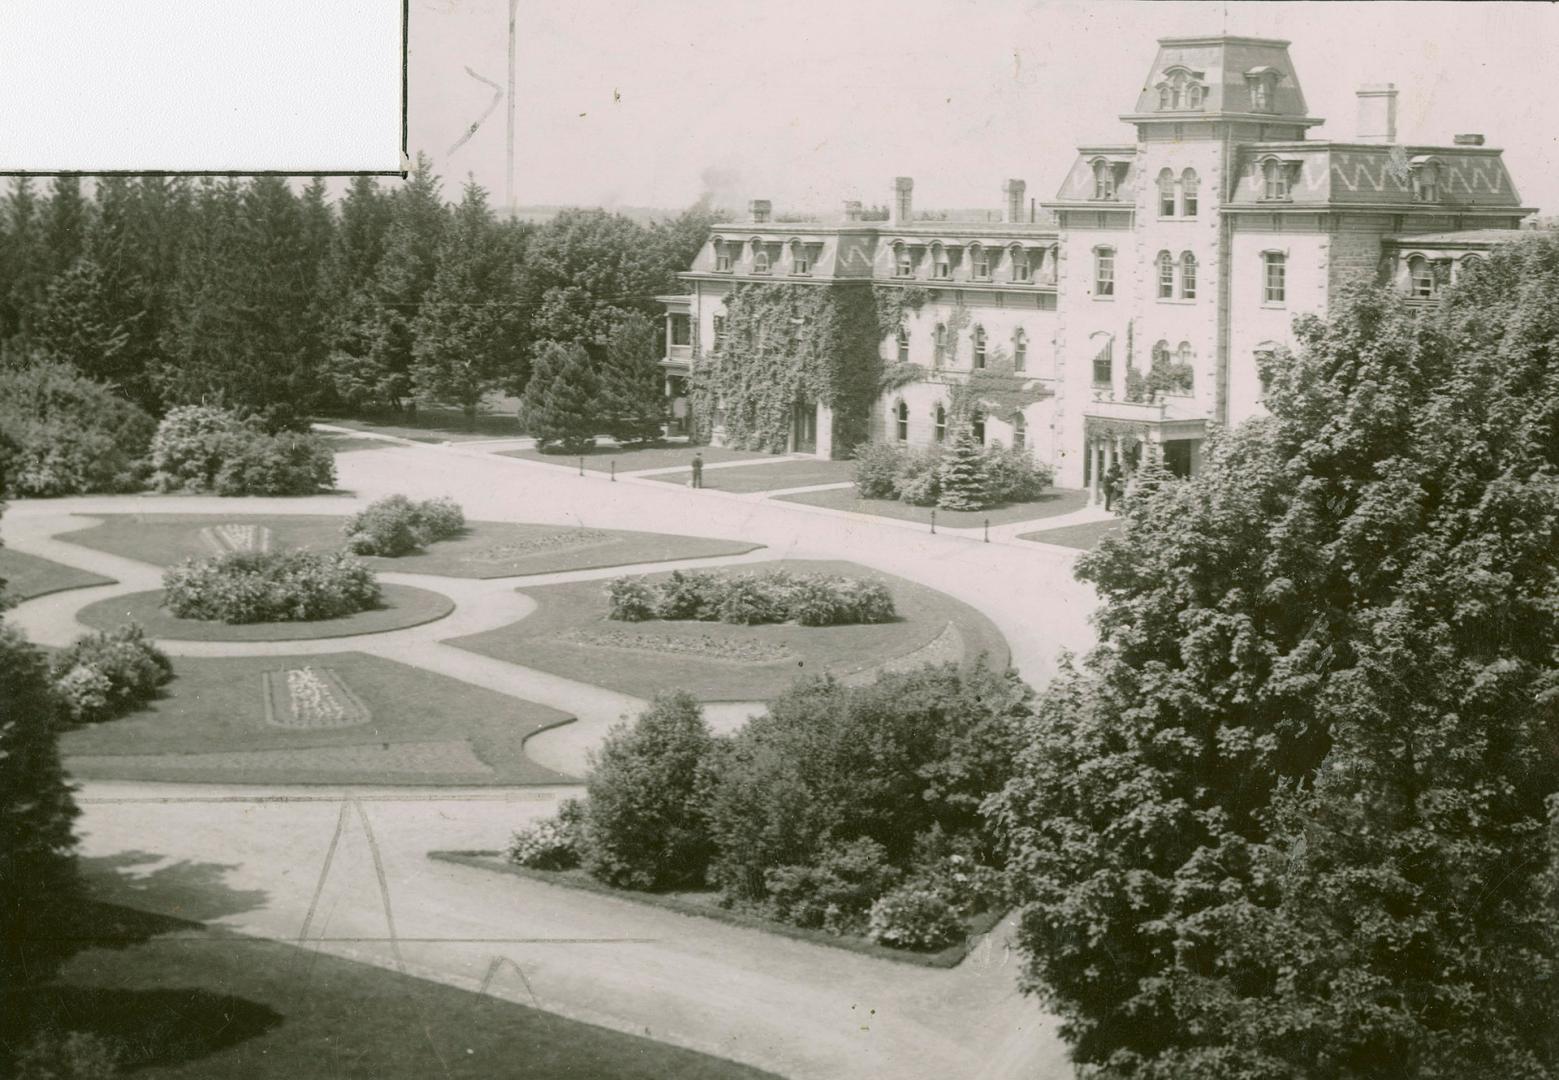 The main building of the Ontario Agricultural College, Guelph